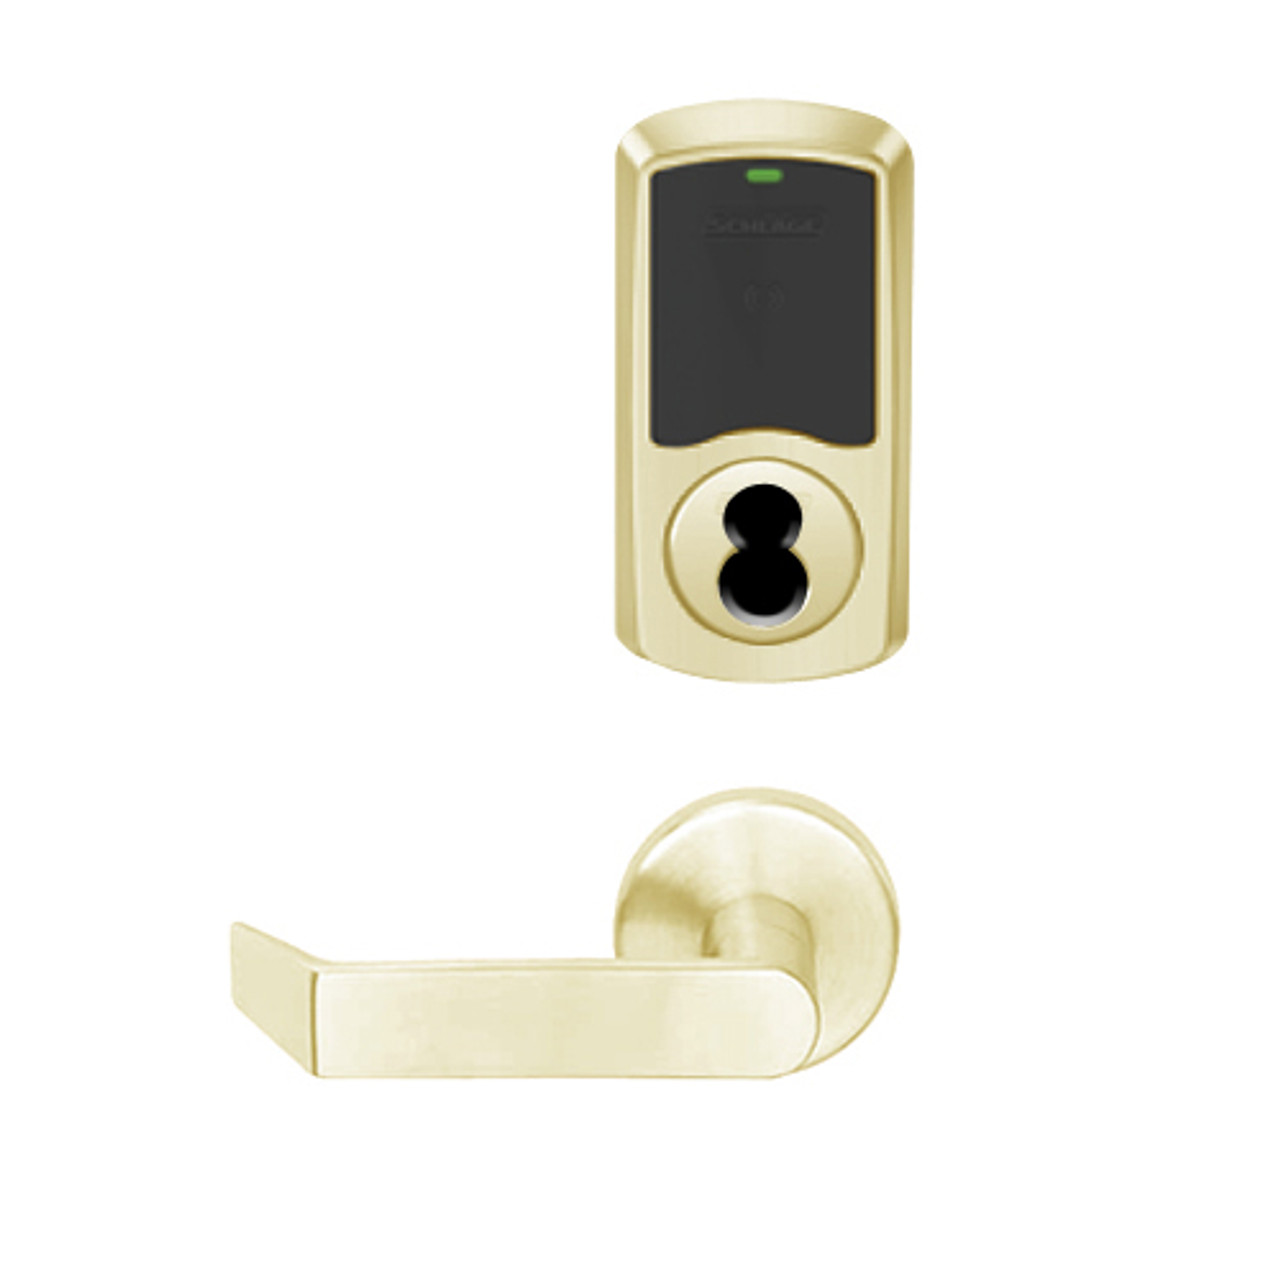 LEMB-GRW-BD-06-606-00A Schlage Privacy/Office Wireless Greenwich Mortise Lock with Push Button & LED Indicator and Rhodes Lever Prepped for SFIC in Satin Brass